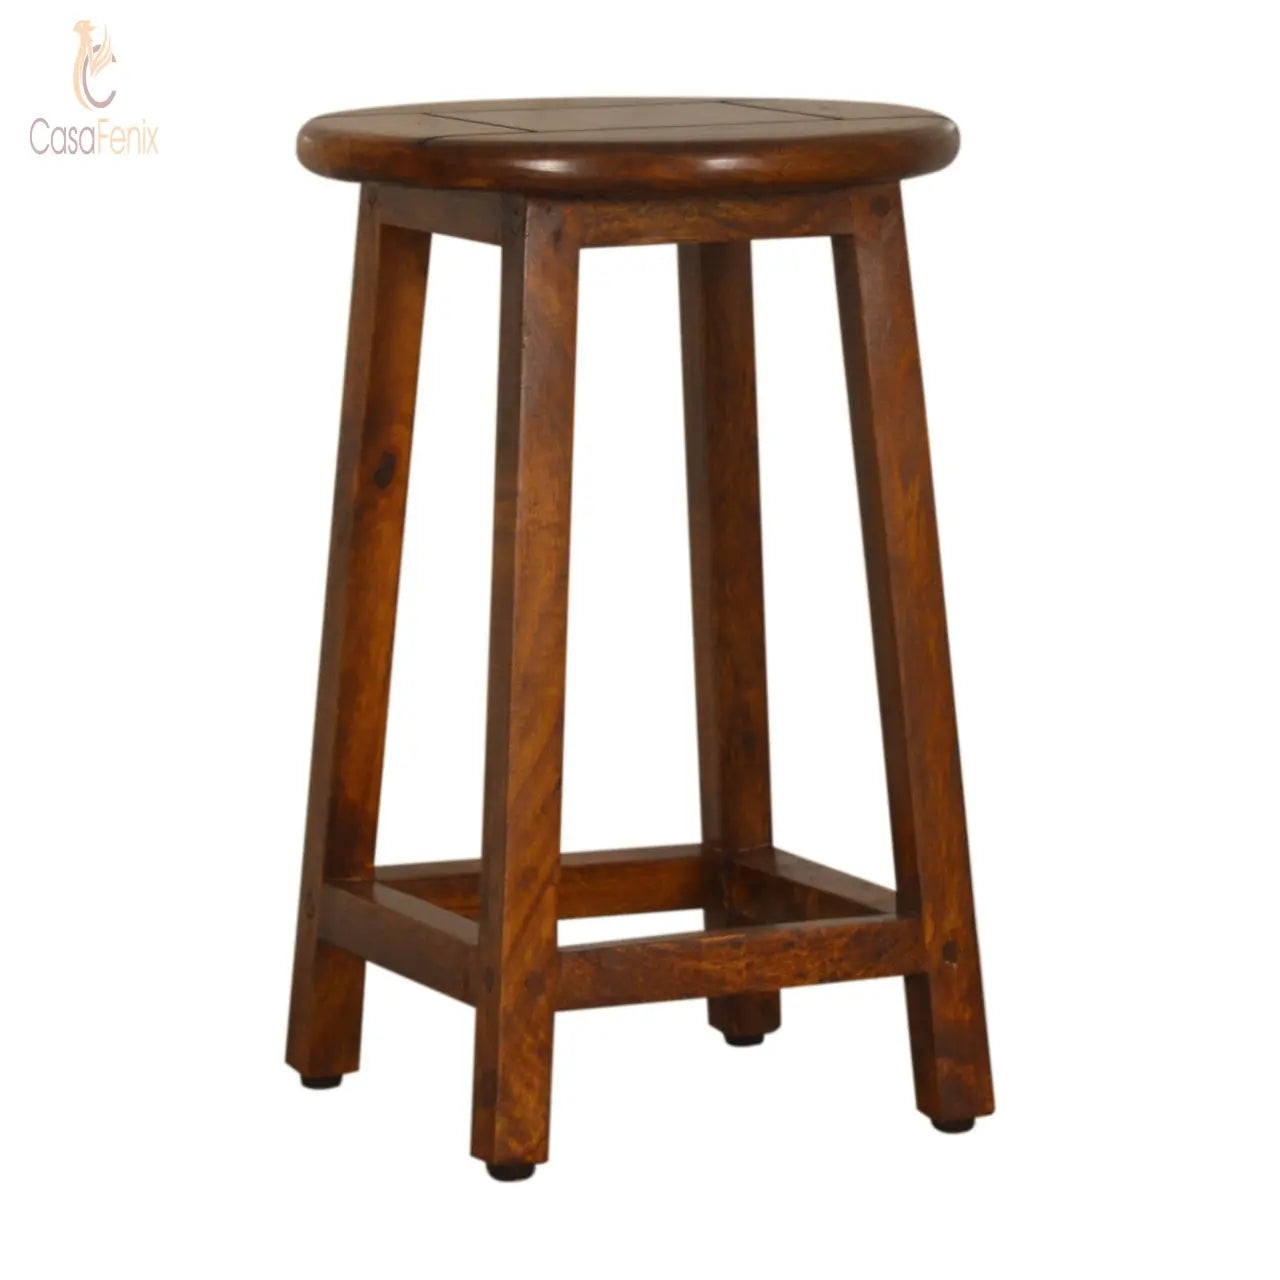 Chestnut Breakfast Table With 2 Stools 100% solid mango wood and has a rich chestnut finish. - CasaFenix